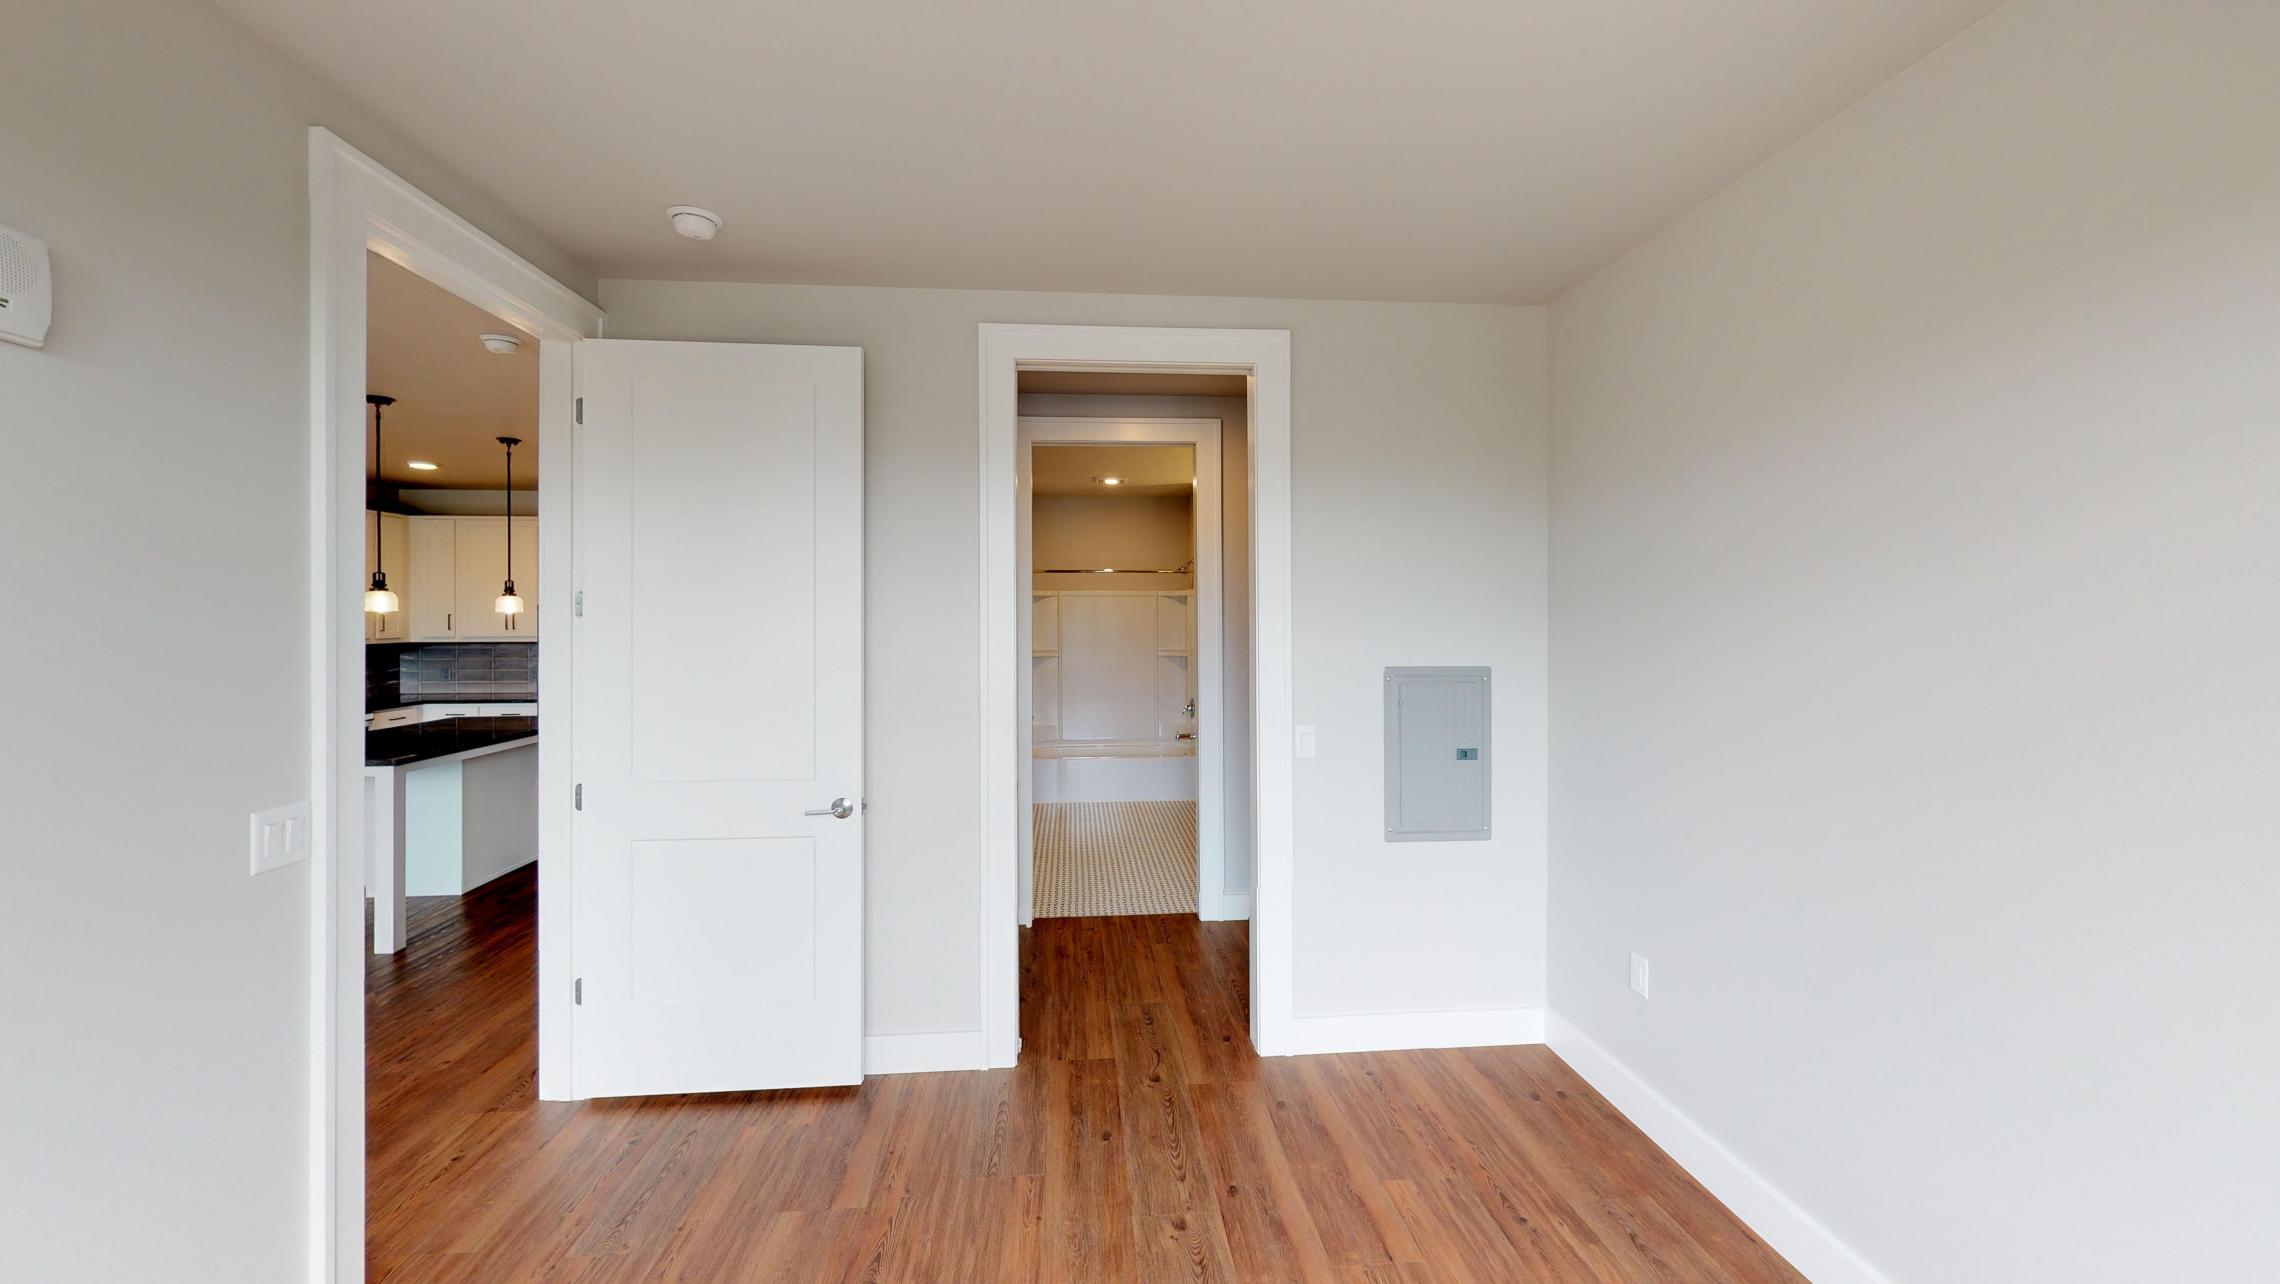 1722-Monroe-Apartment-313-One-Bedroom-Bathroom-Kitchen-Living-Sunny-Bright-Modern-Lifestyle-Cats-Dogs-Fitness-Terrace-Captiol-Madison-City-Upscale-Design